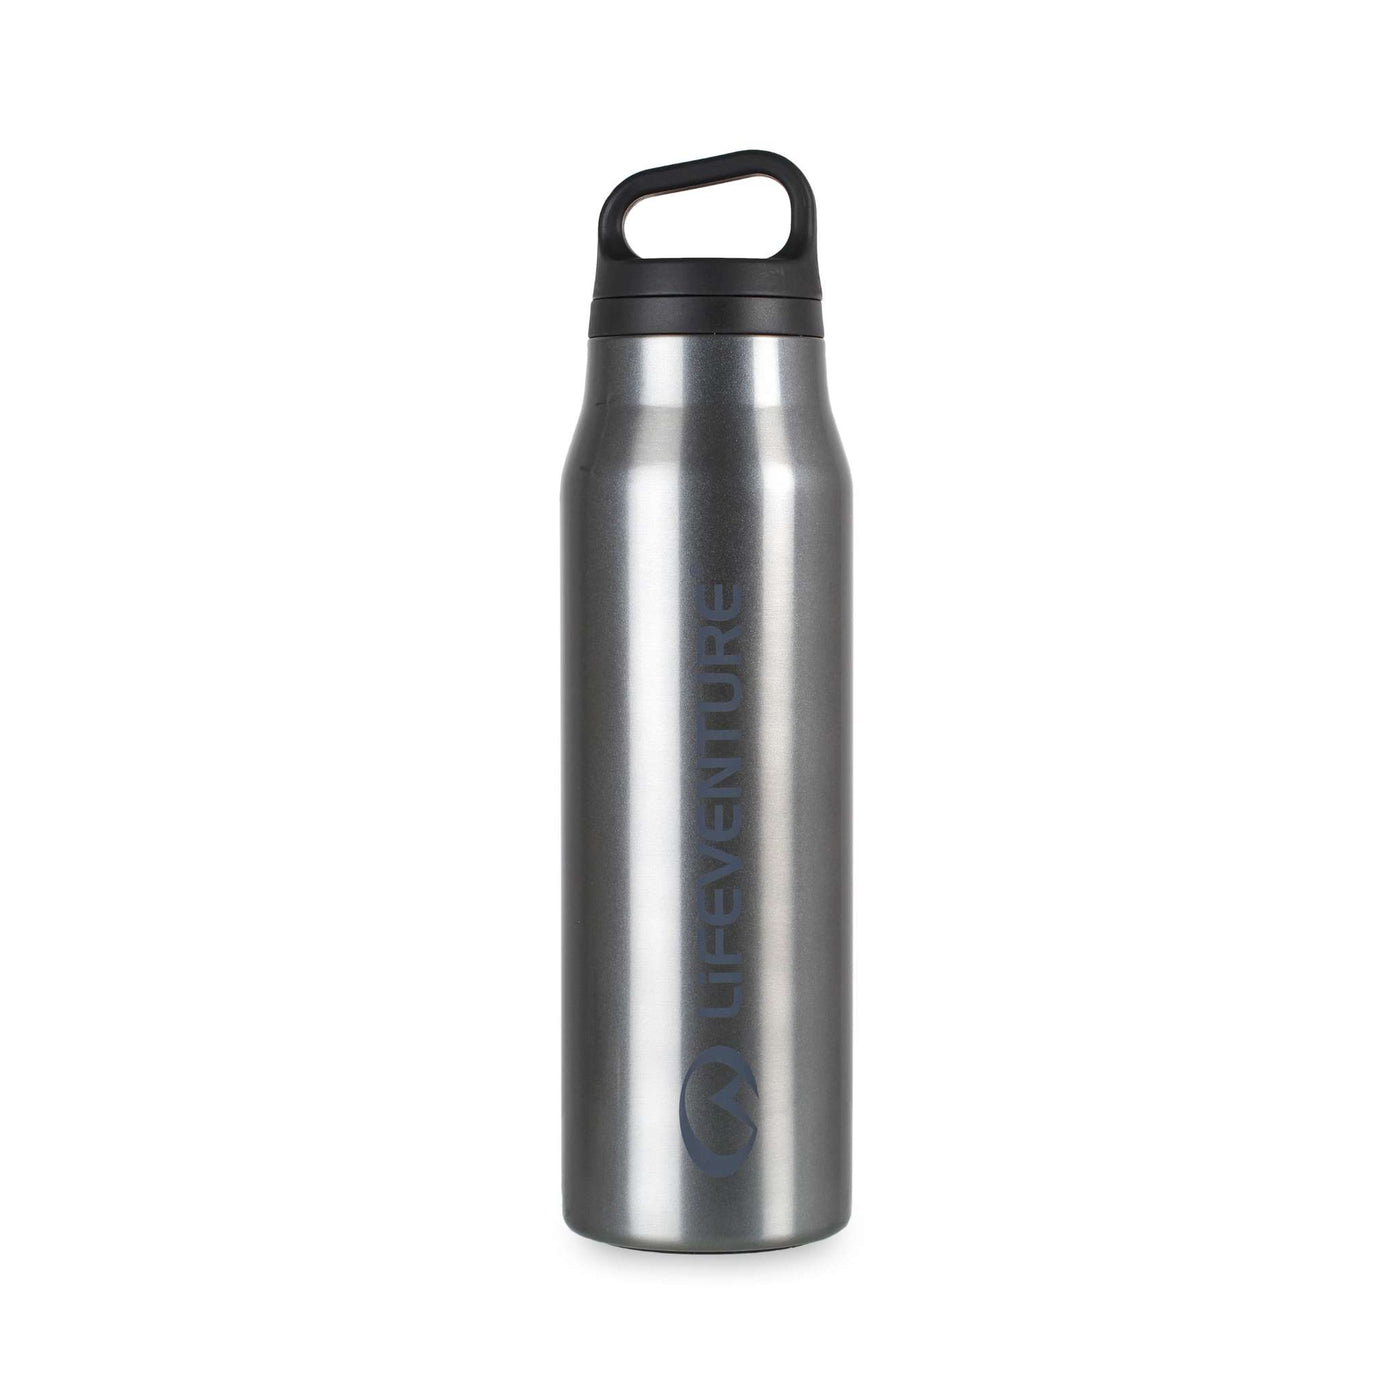 Lifeventure TiV Vacuum Bottle | Outdoor Water BottlesLifeventure Vacuum Bottle | Outdoor Water Bottles | Further Faster Christchurch NZ #charcoal